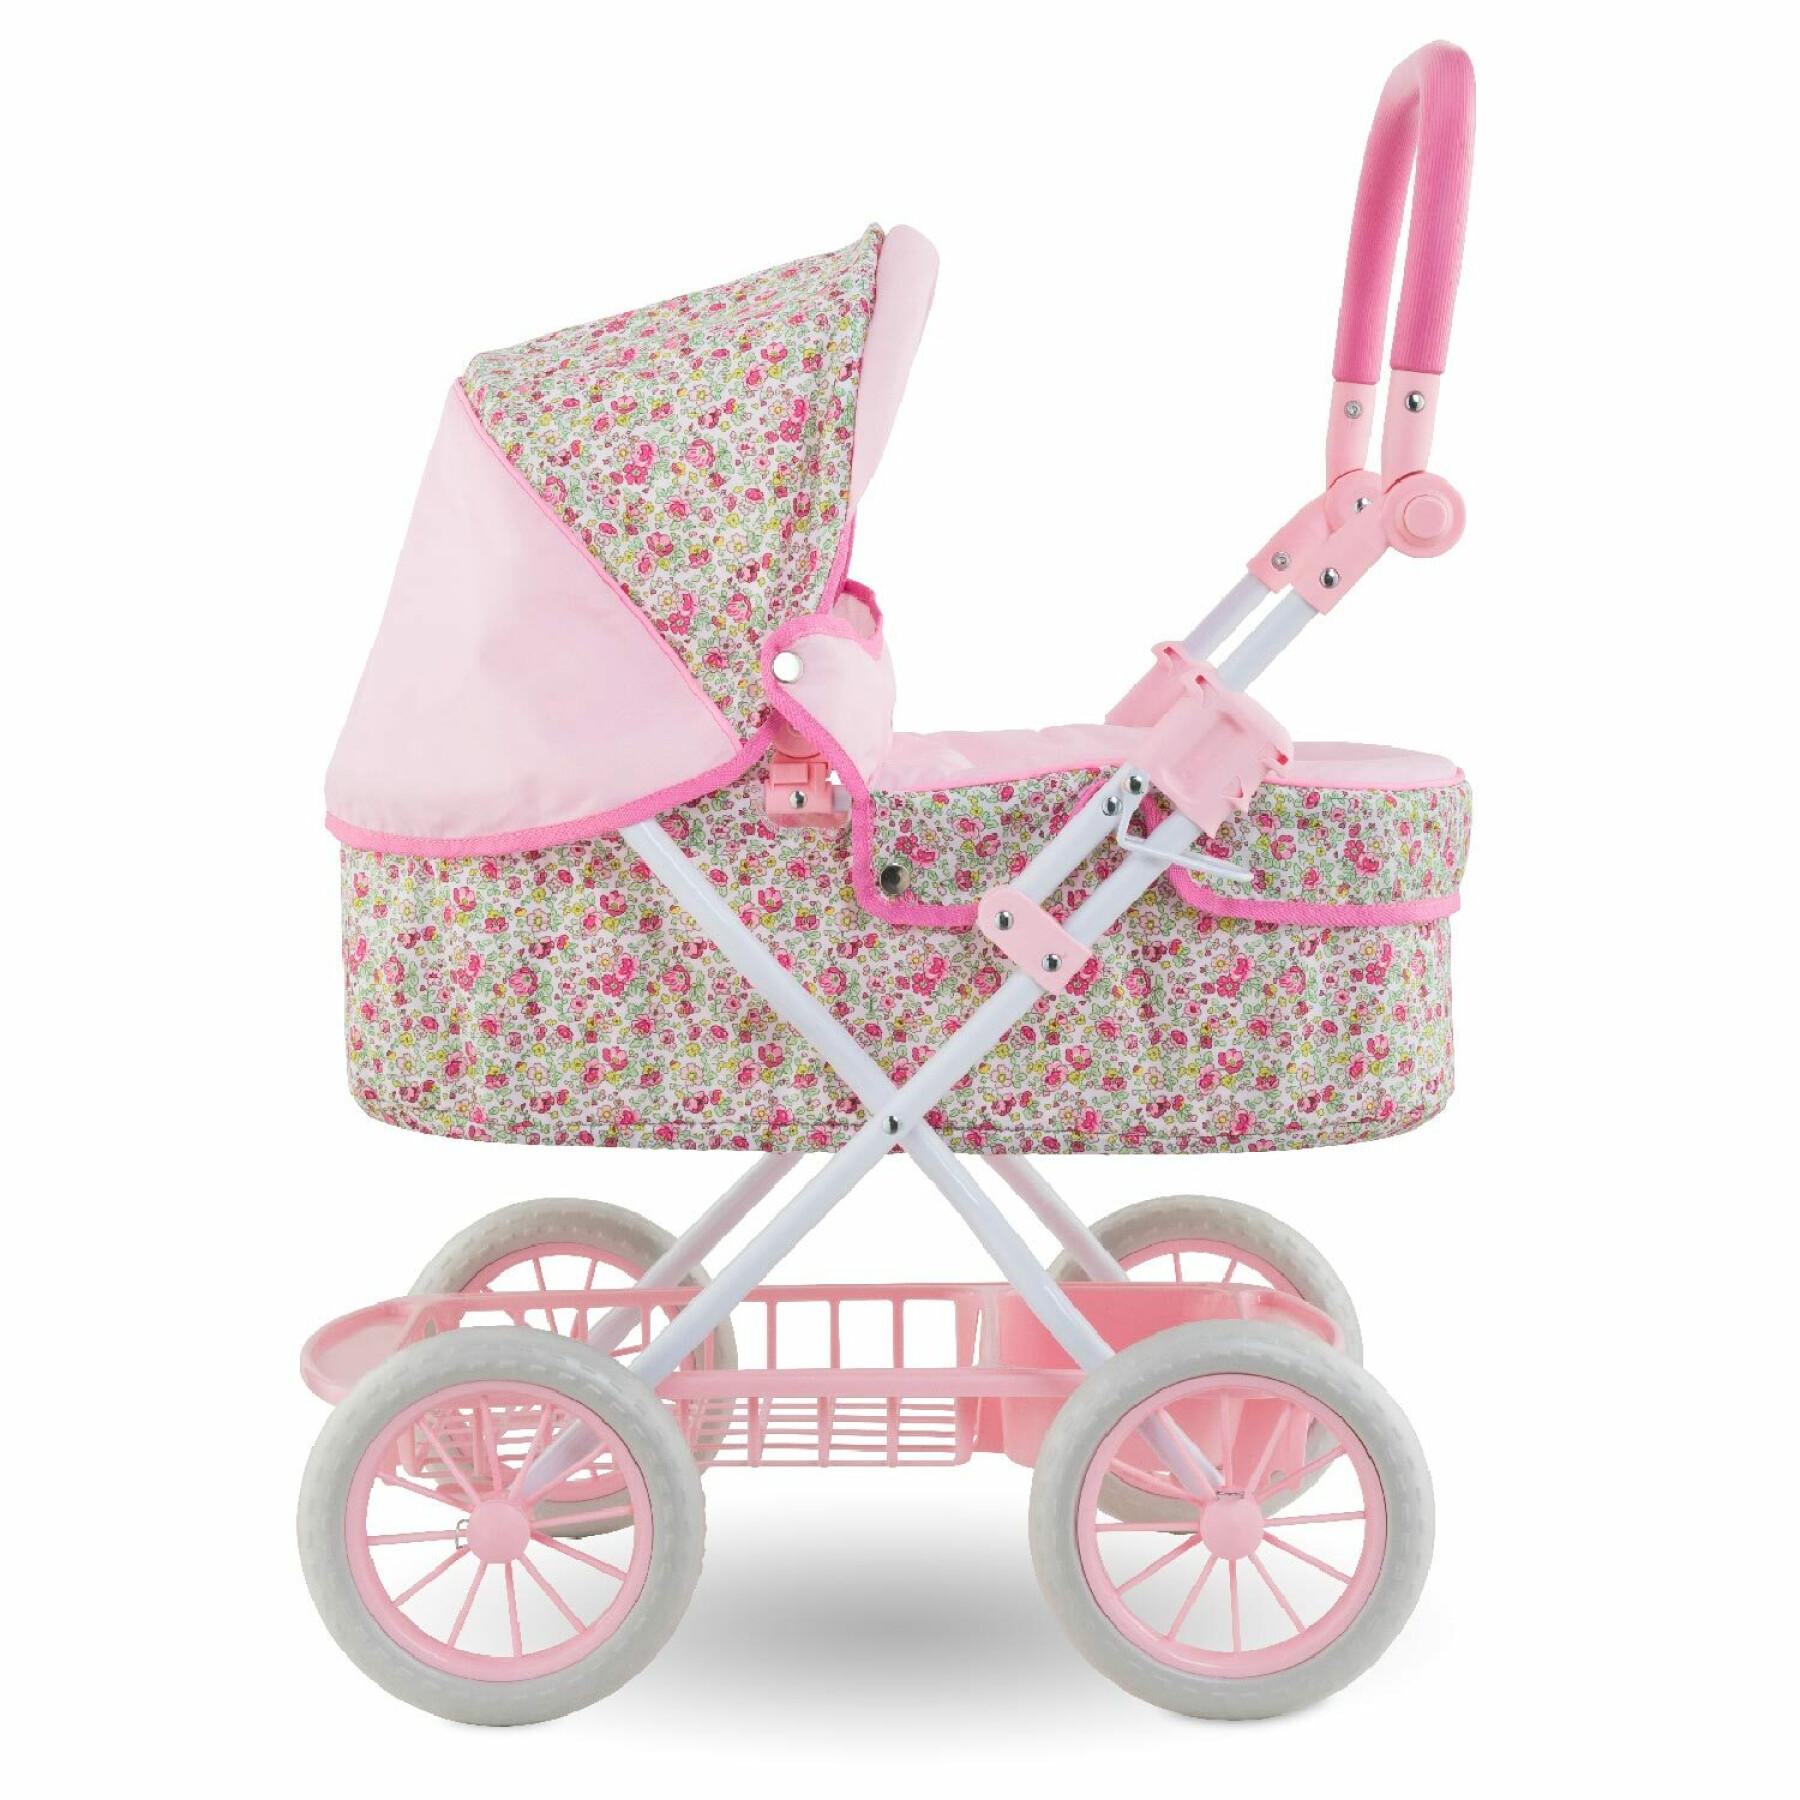 Baby carriage for baby Corolle